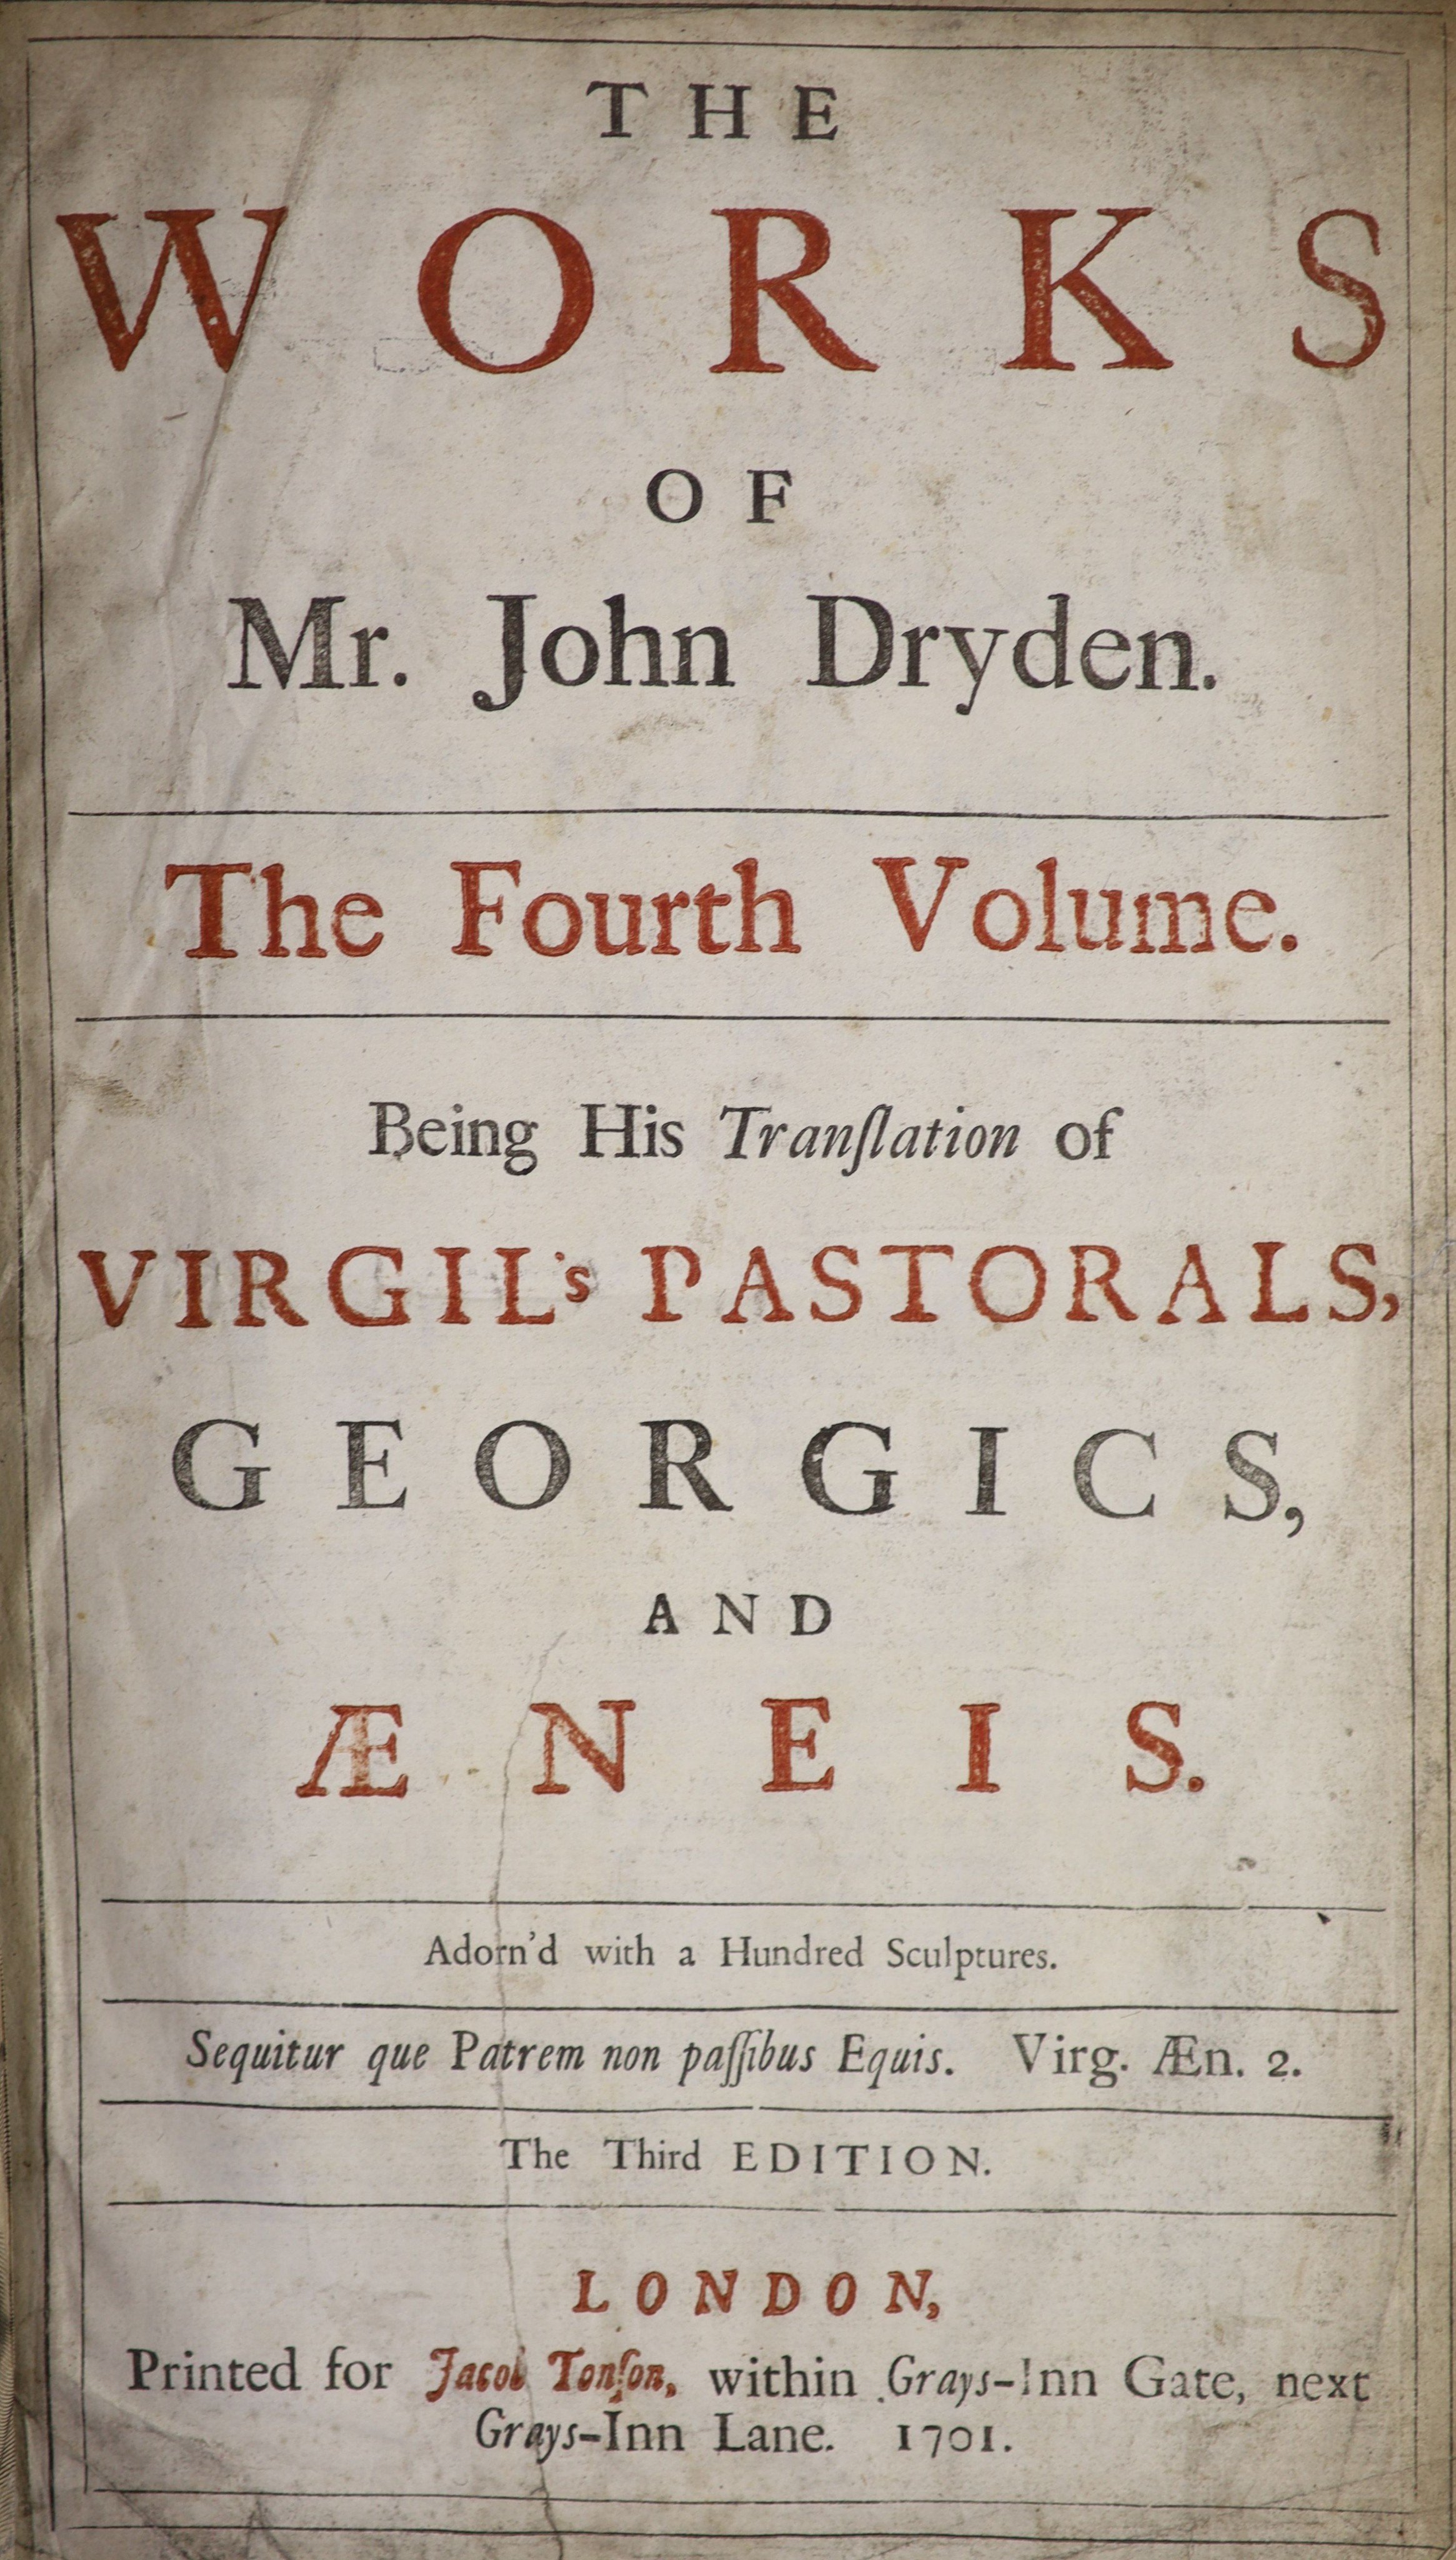 Dryden, John - The Works of Mr John Dryden. The Fourth Volume. Being his Translation of Virgils Pastorals, Georgics, and Aeneis ... 3rd edition. pictorial engraved & printed titles